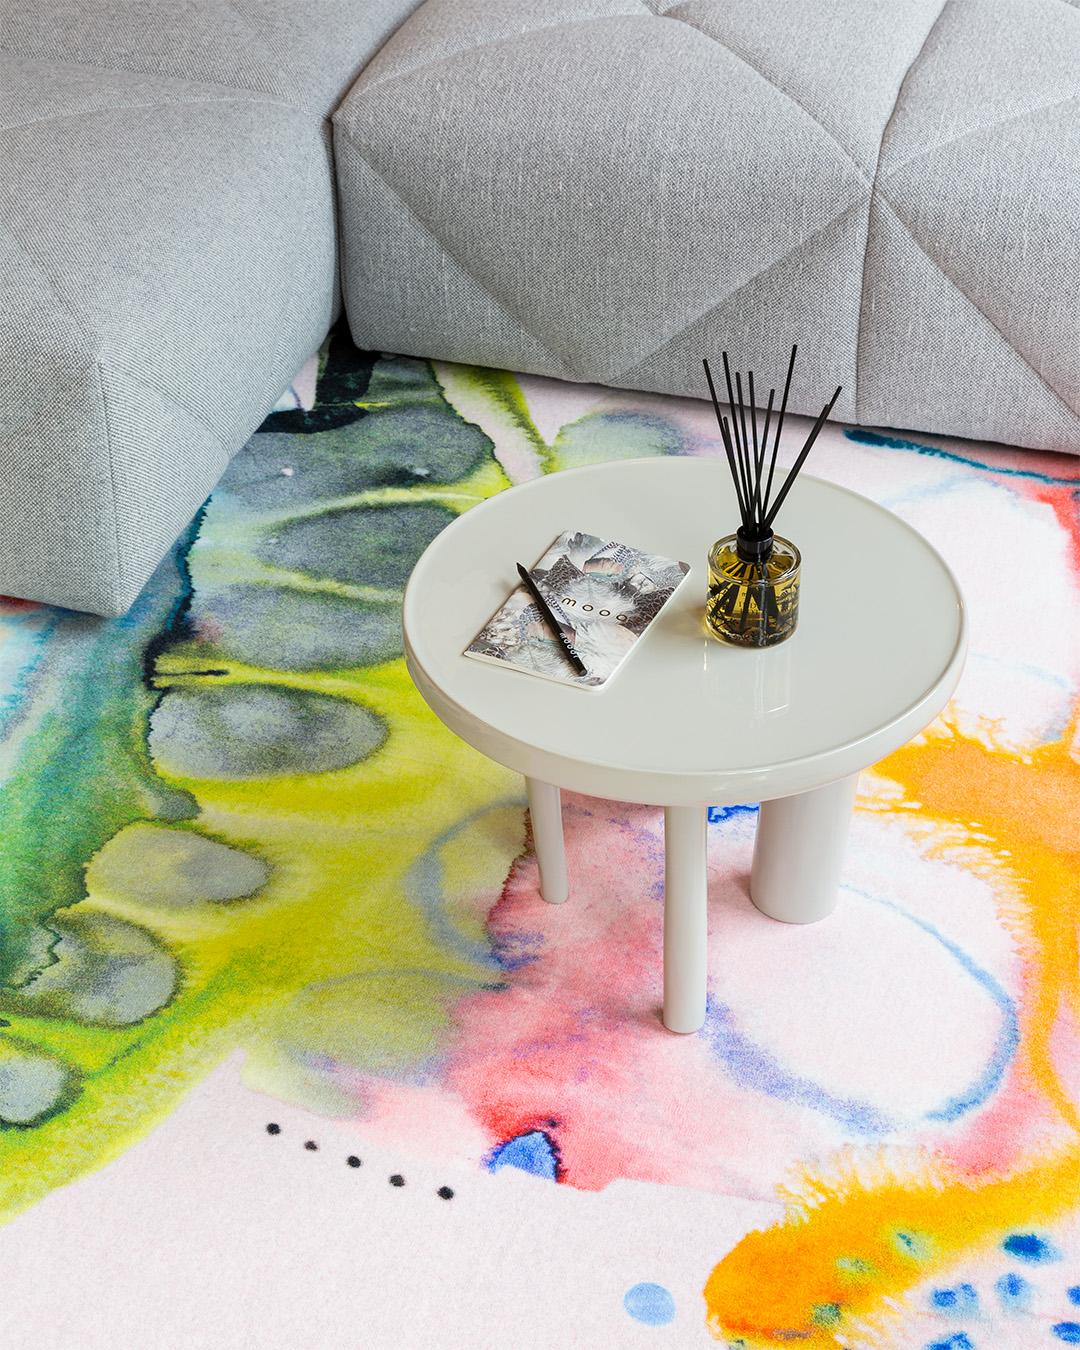 Moooi small wasp II rug in soft yarn polyamide by Emma Larsson.

Emma Larsson is a Stockholm-based artist and illustrator. Her work strikes the balance between colourful dreamscape and inarticulable melancholy. Emma has evolved her practice to